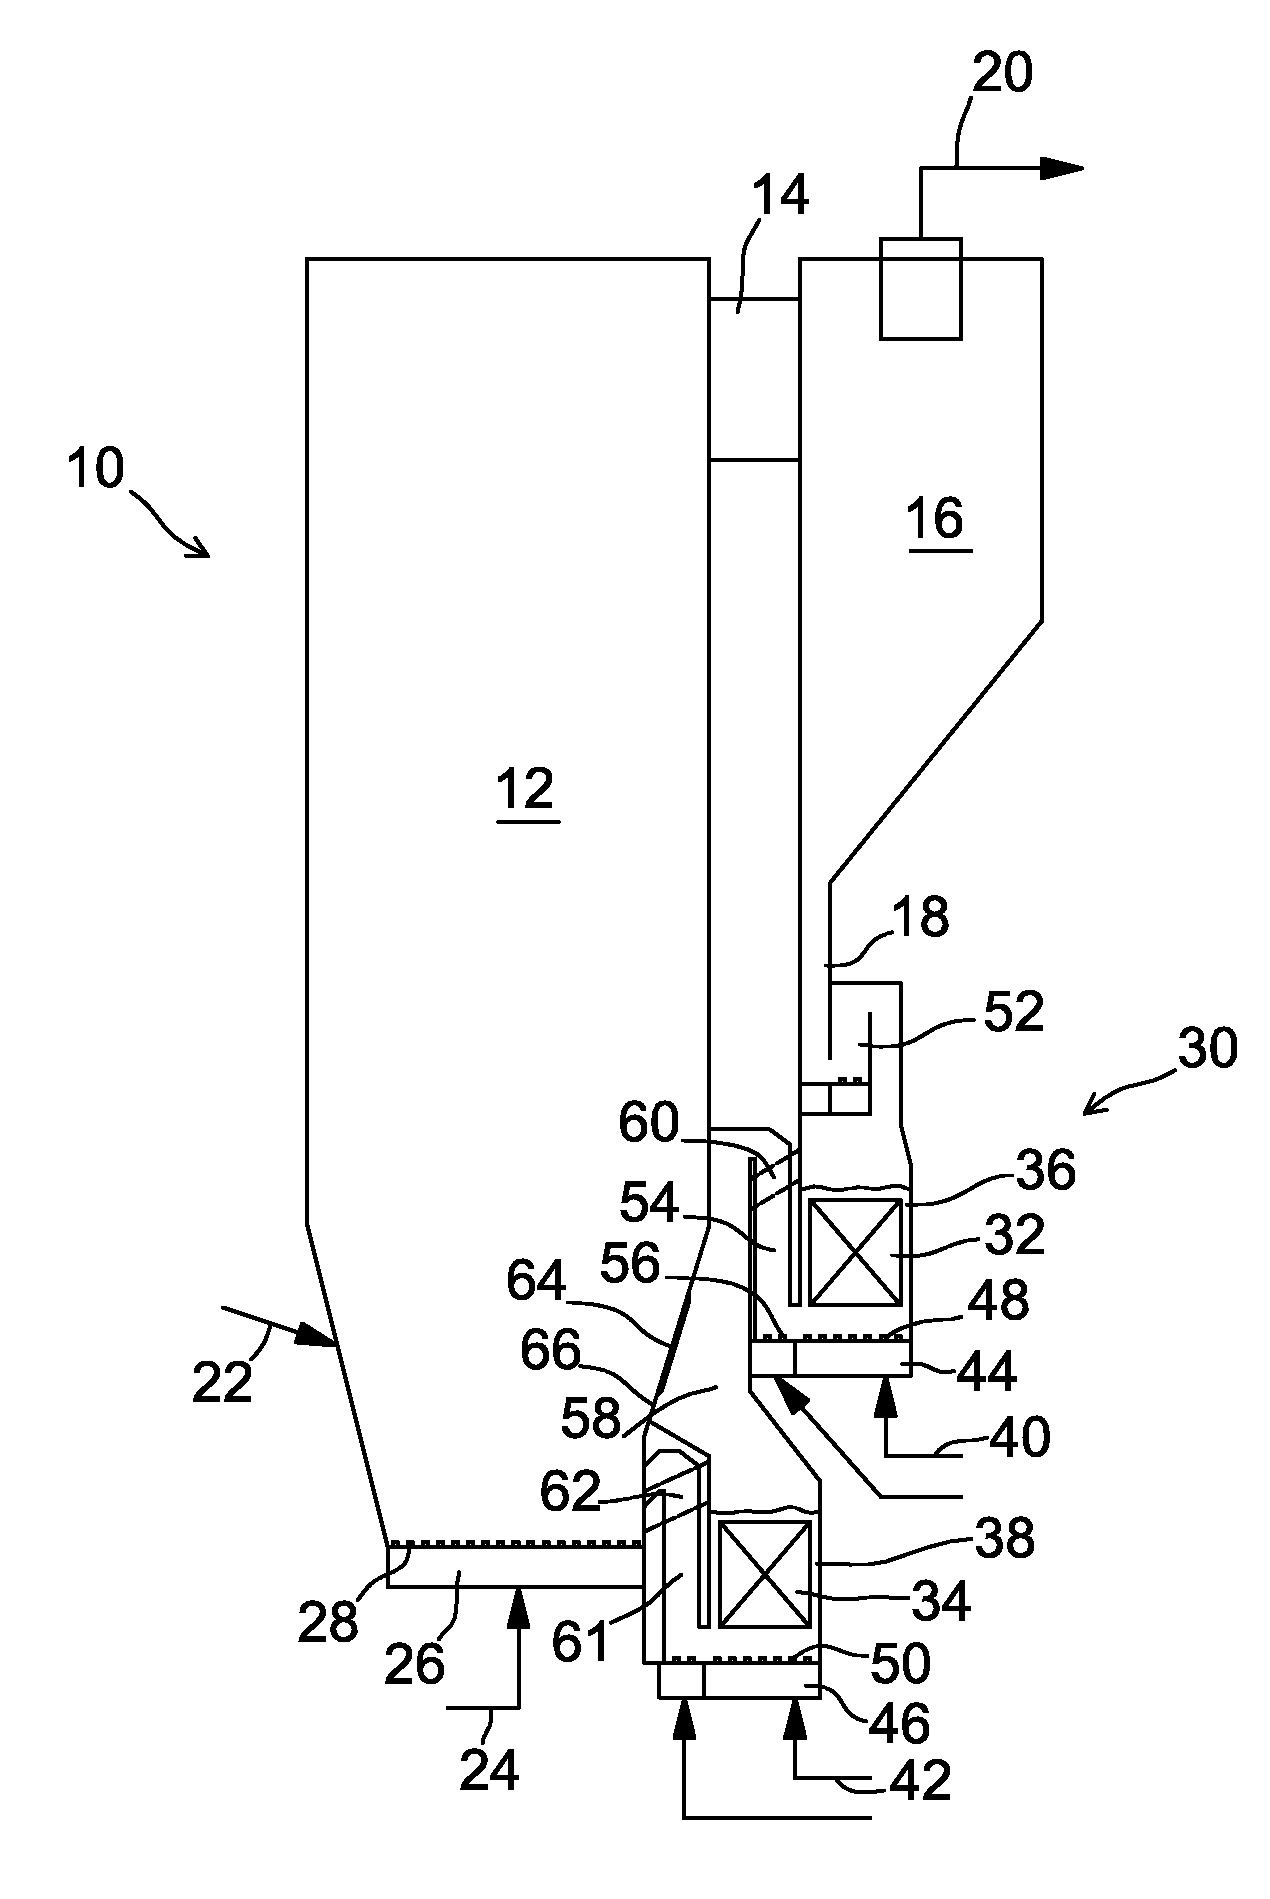 Fluidized Bed Heat Exchanger for a Circulating Fluidized Bed Boiler and a Circulating Fluidized Bed Boiler with a Fluidized Bed Heat Exchanger